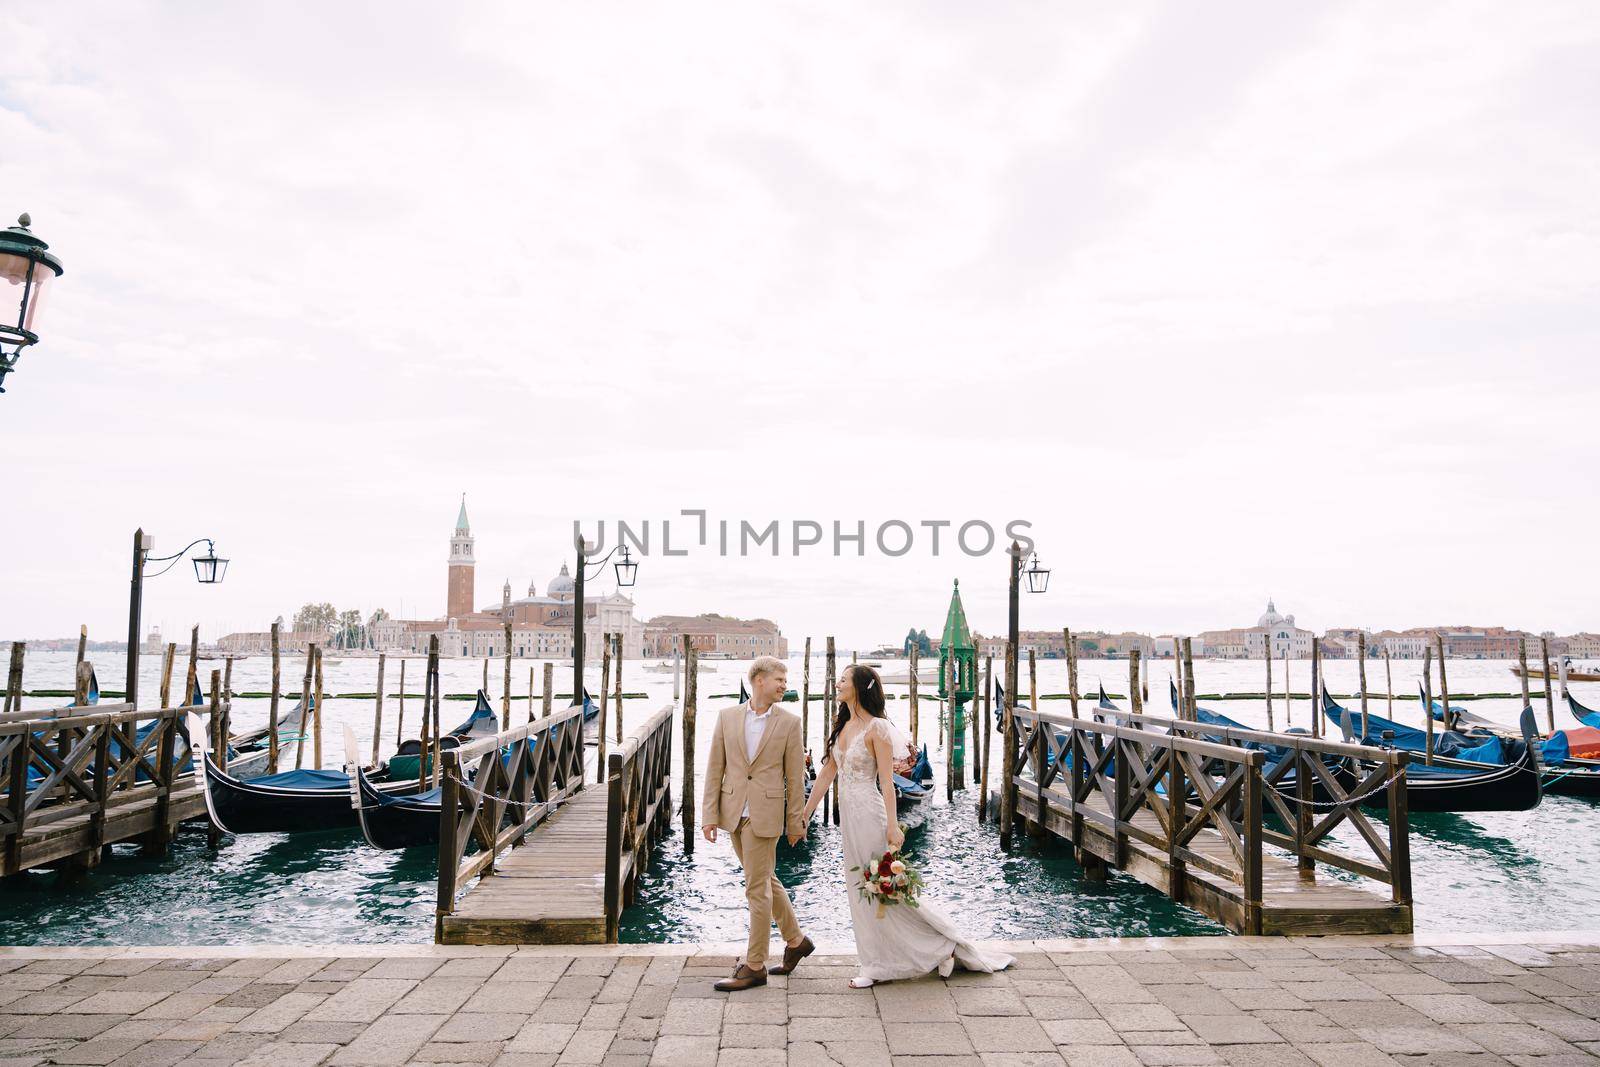 The bride and groom are walking along the gondola pier, holding hand in Venice, near Piazza San Marco, overlooking San Giorgio Maggiore and the sunset sky. The largest gondola pier in Venice, Italy. by Nadtochiy